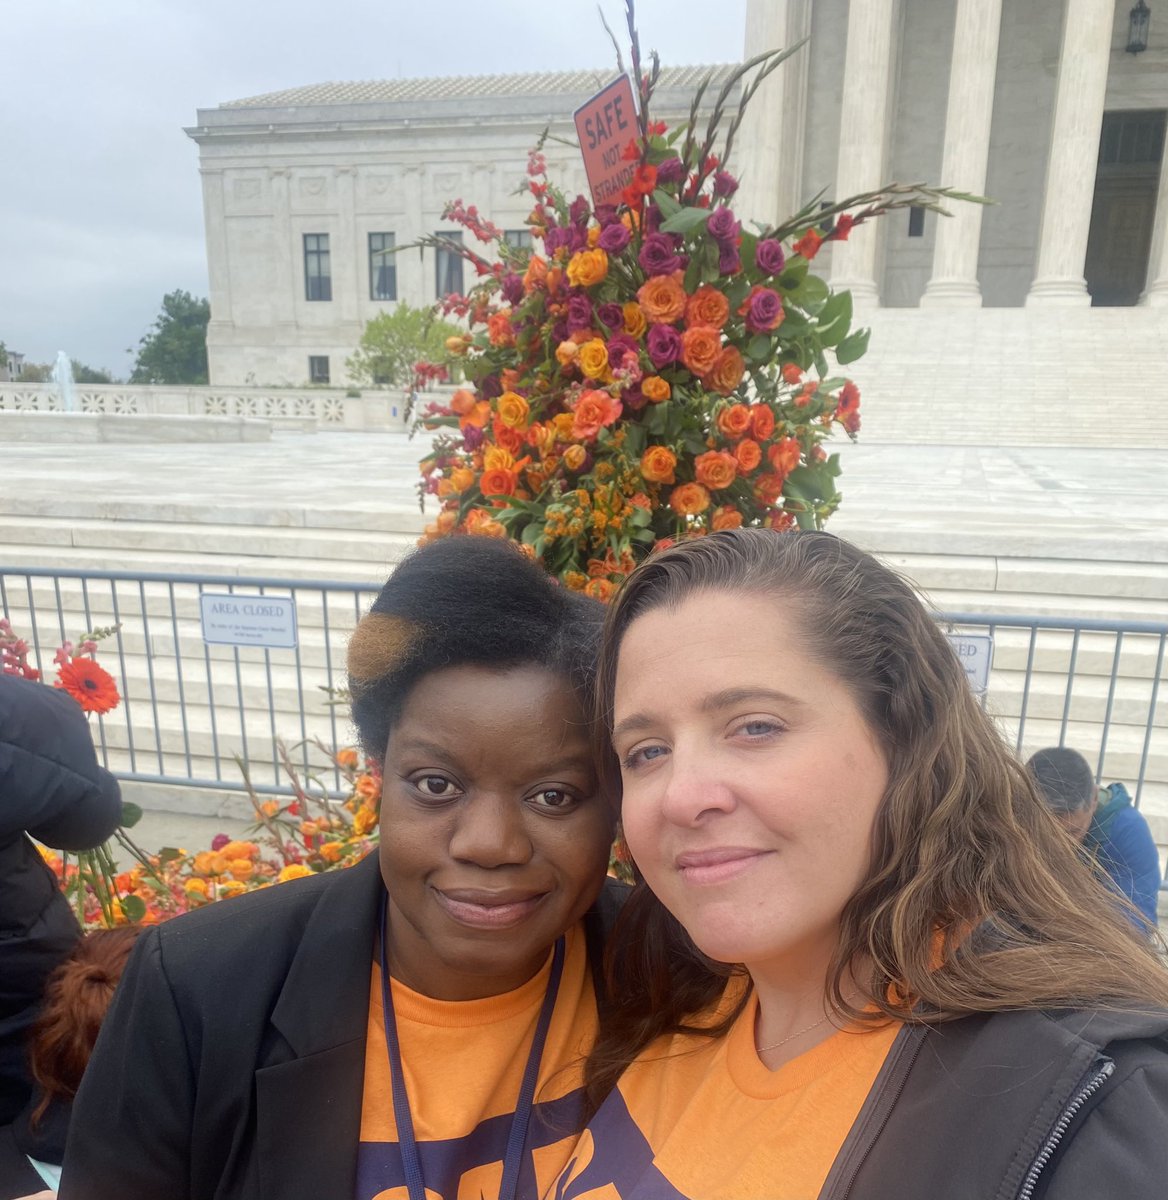 From Tijuana to OC to LA to DC, always proudly standing alongside @GuerlineMJozef as we fight to make human rights a reality for asylum seekers. #SafeNotStranded #EndMPP #WelcomeWithDignity